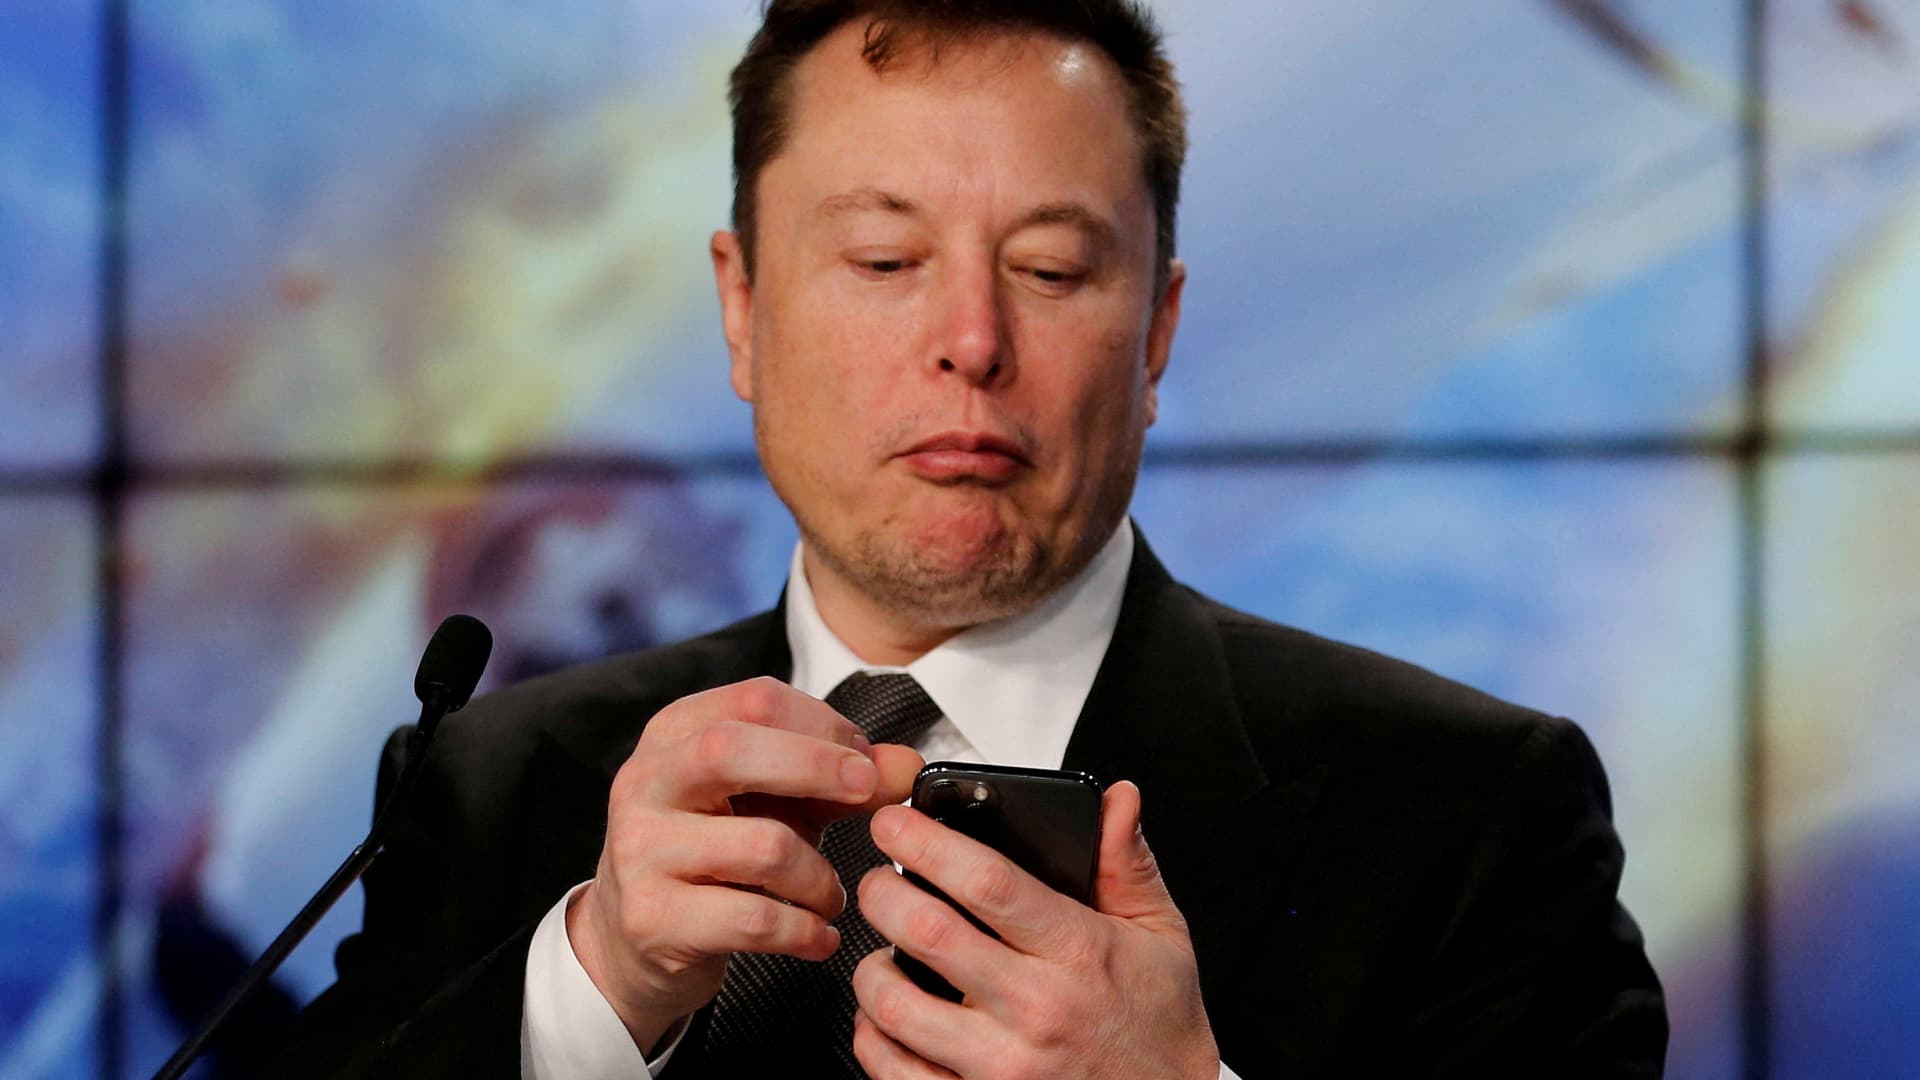 Musk's plan to buy Twitter has worried policymakers around the world.